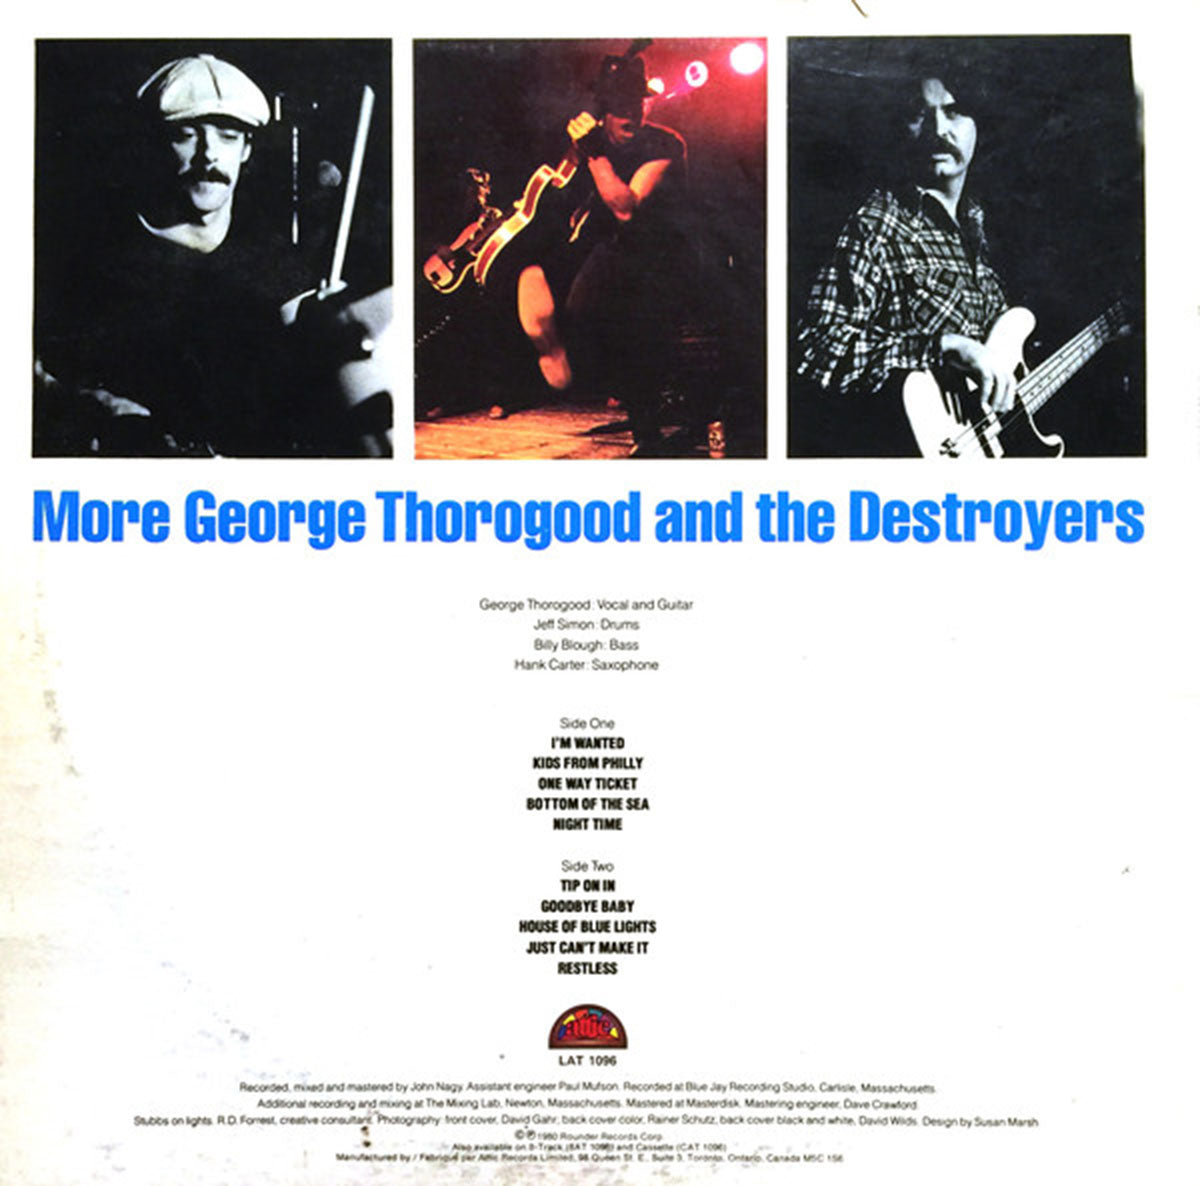 George Thorogood And The Destroyers ‎– More - 1980